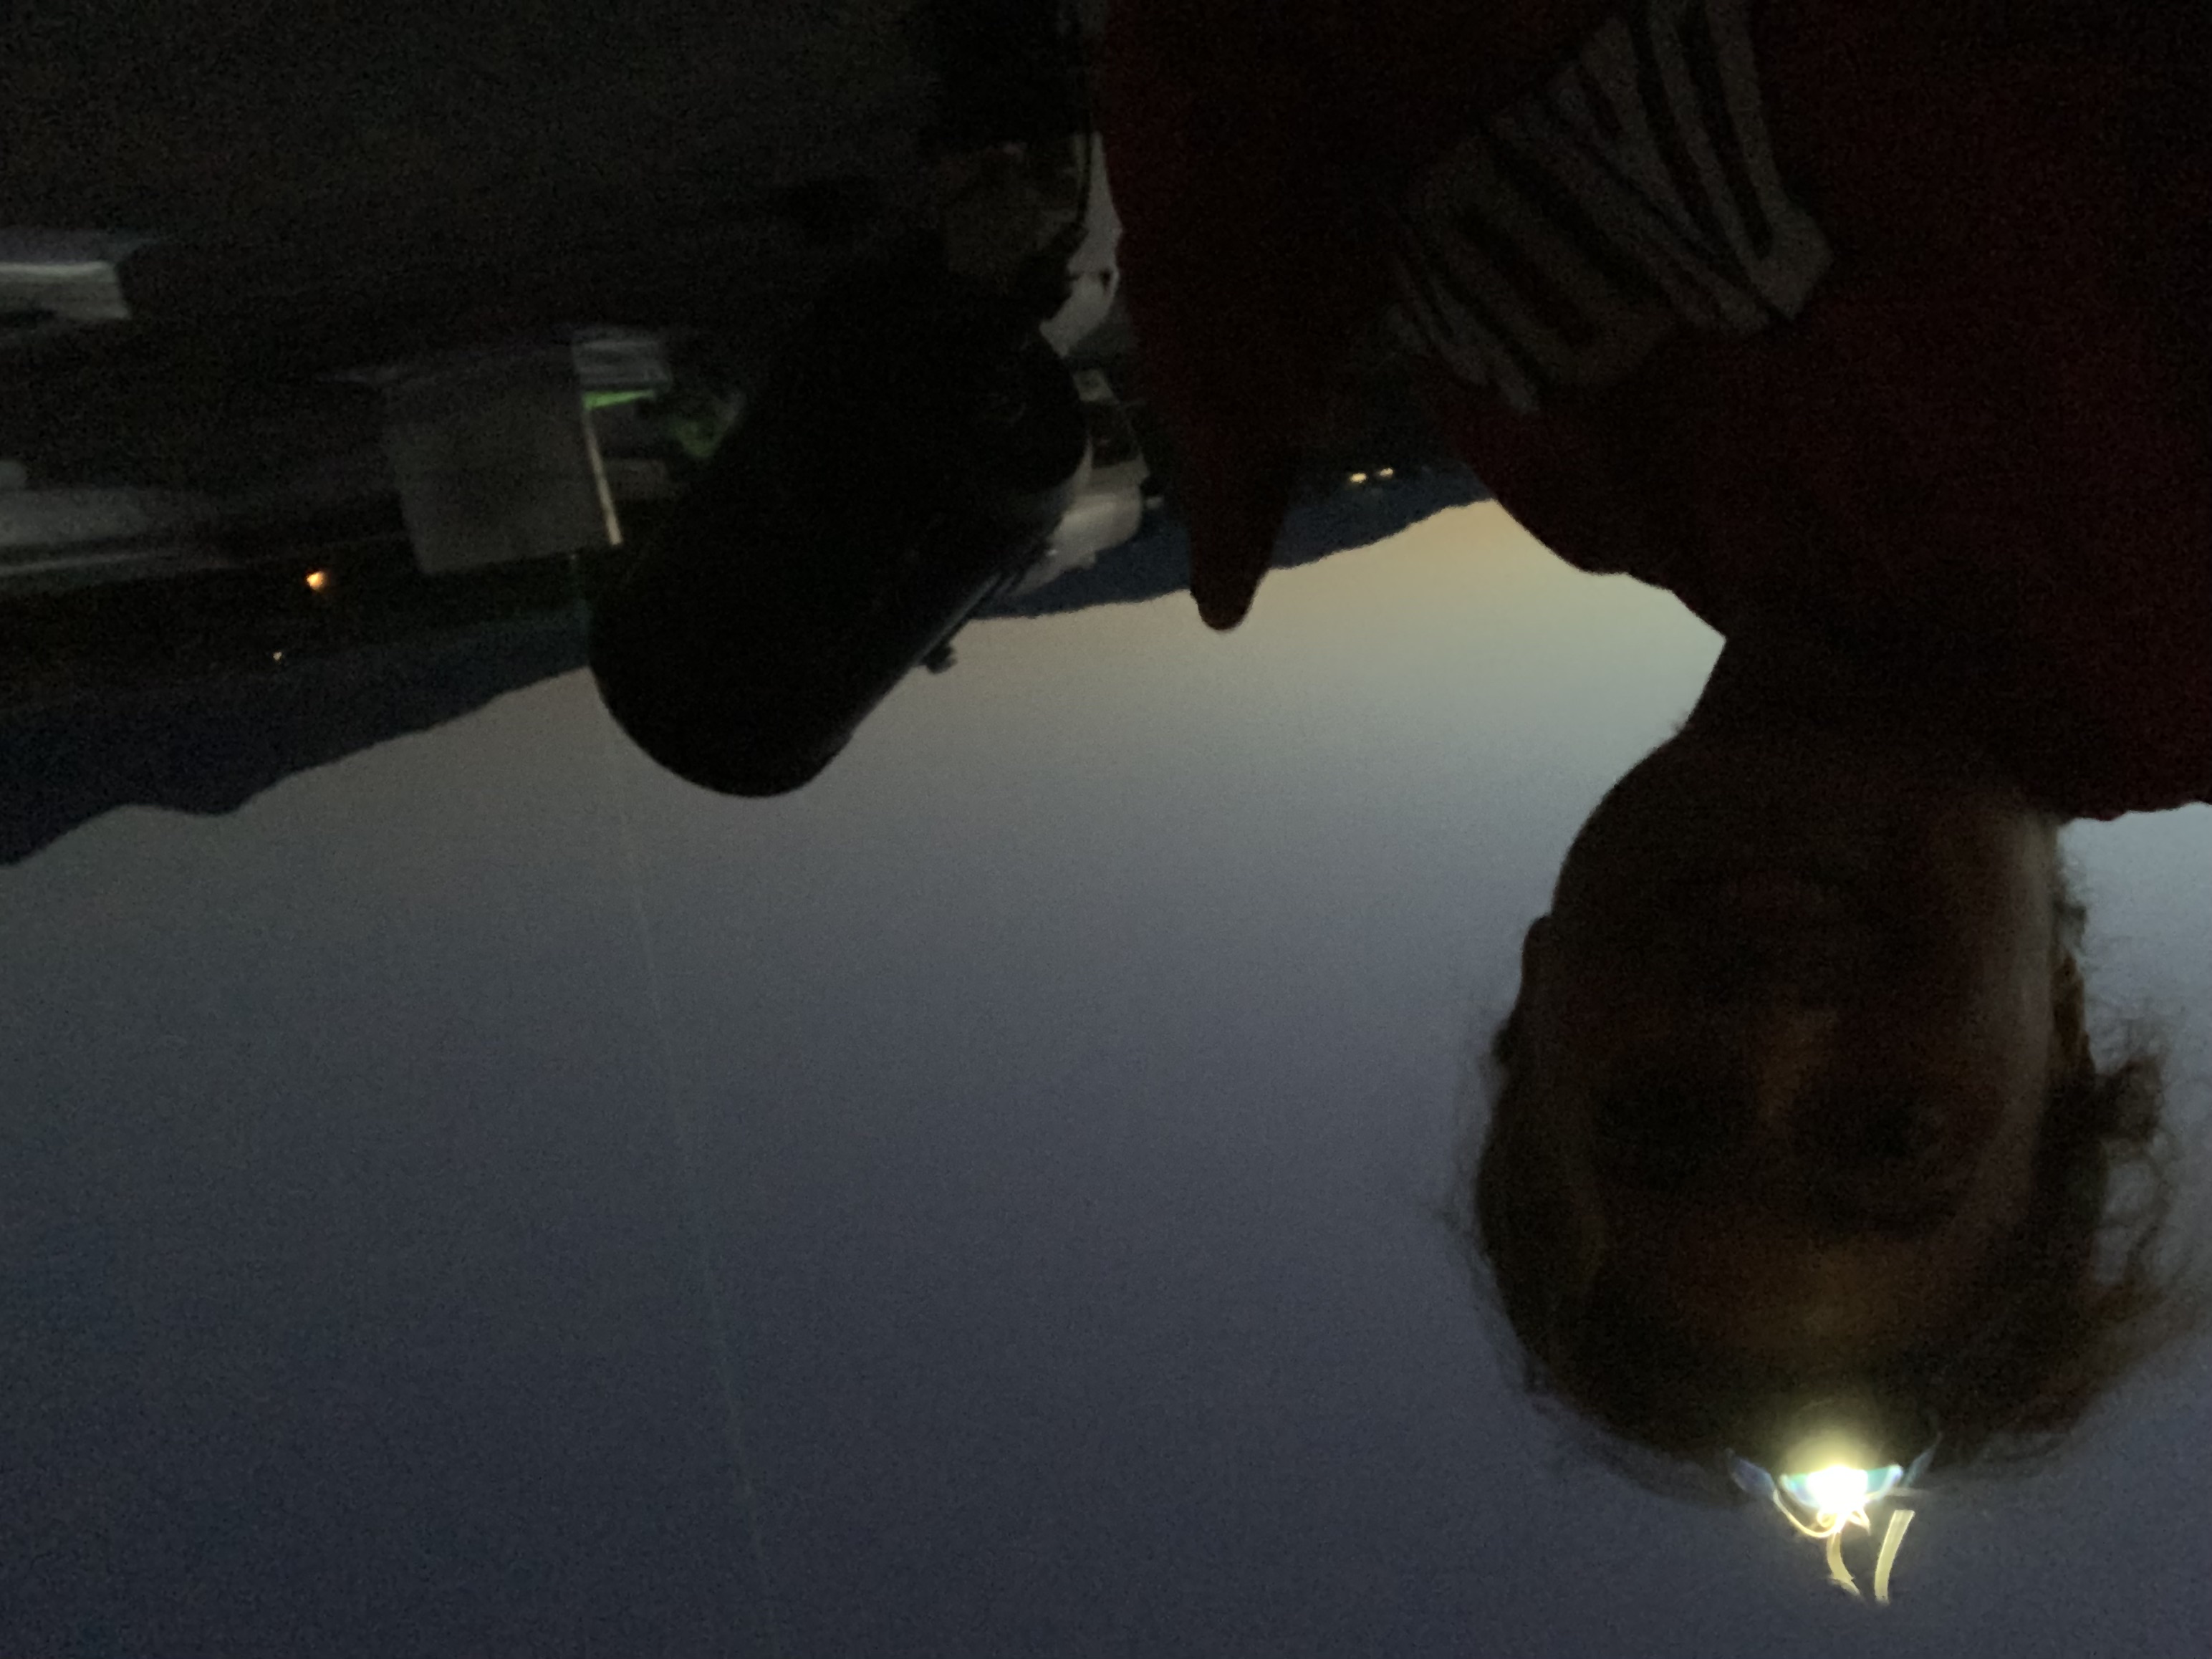 One of my many headlamp selfies taken on the roof of Cobleigh